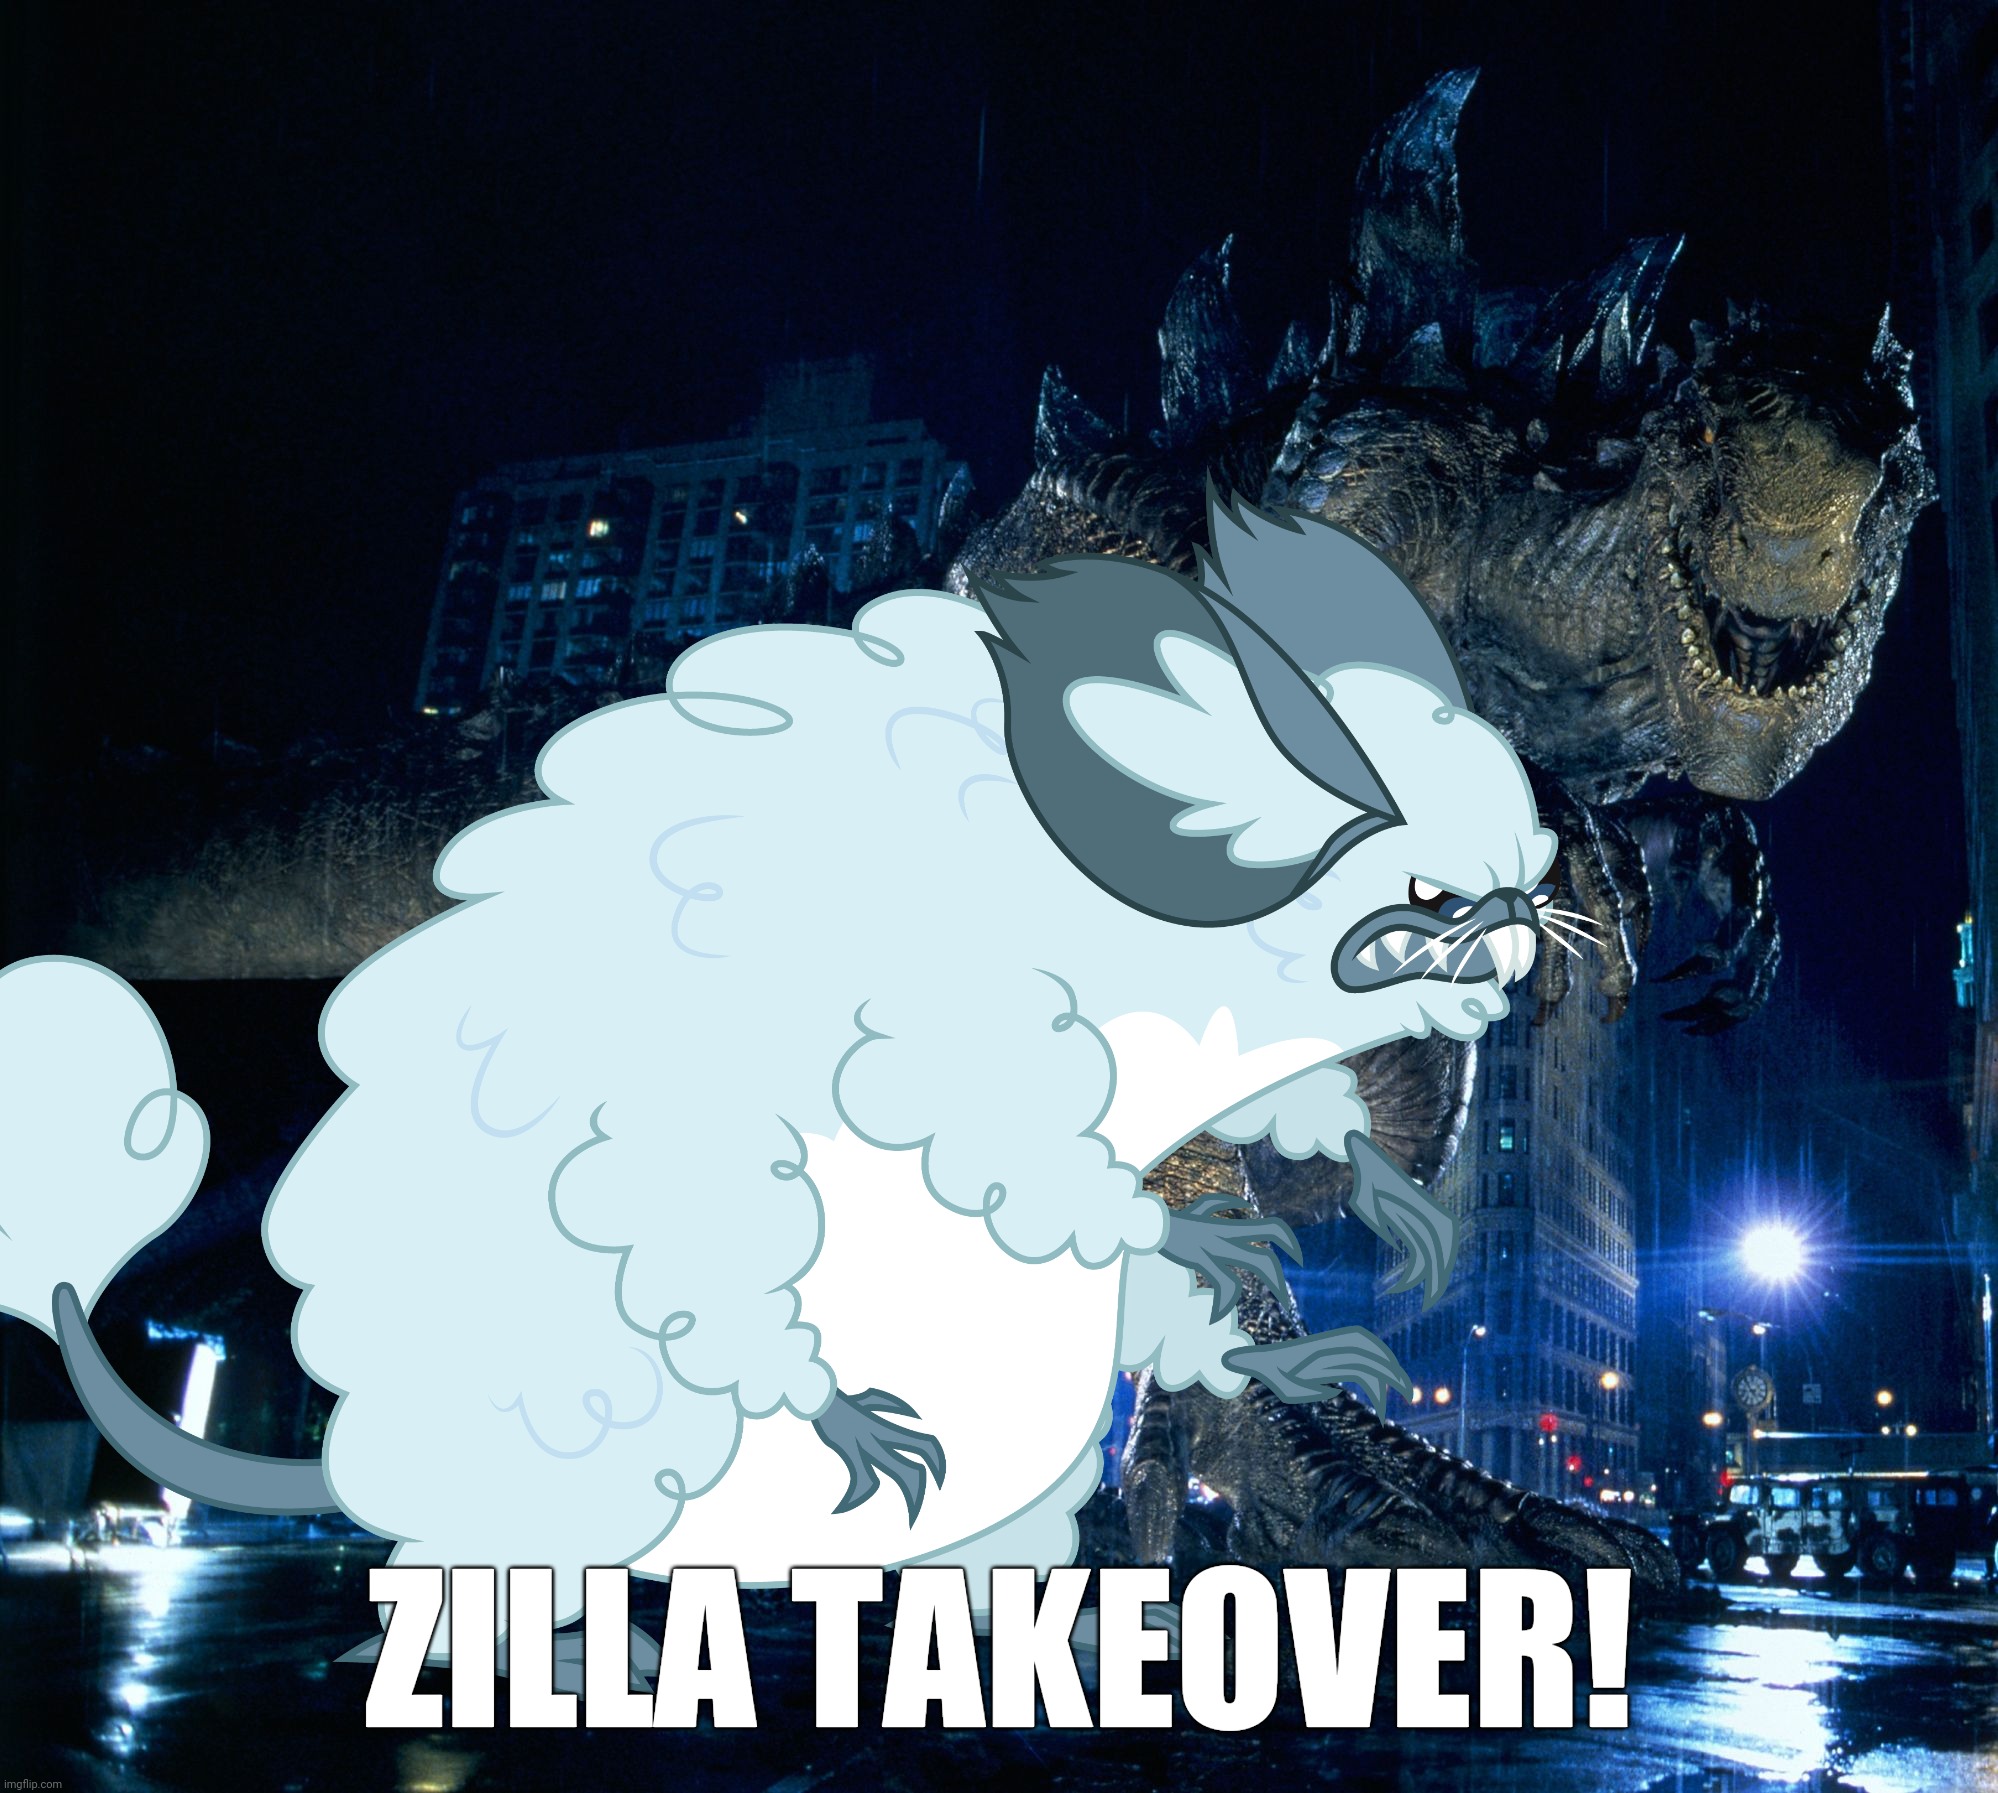 ZILLA TAKEOVER! | made w/ Imgflip meme maker